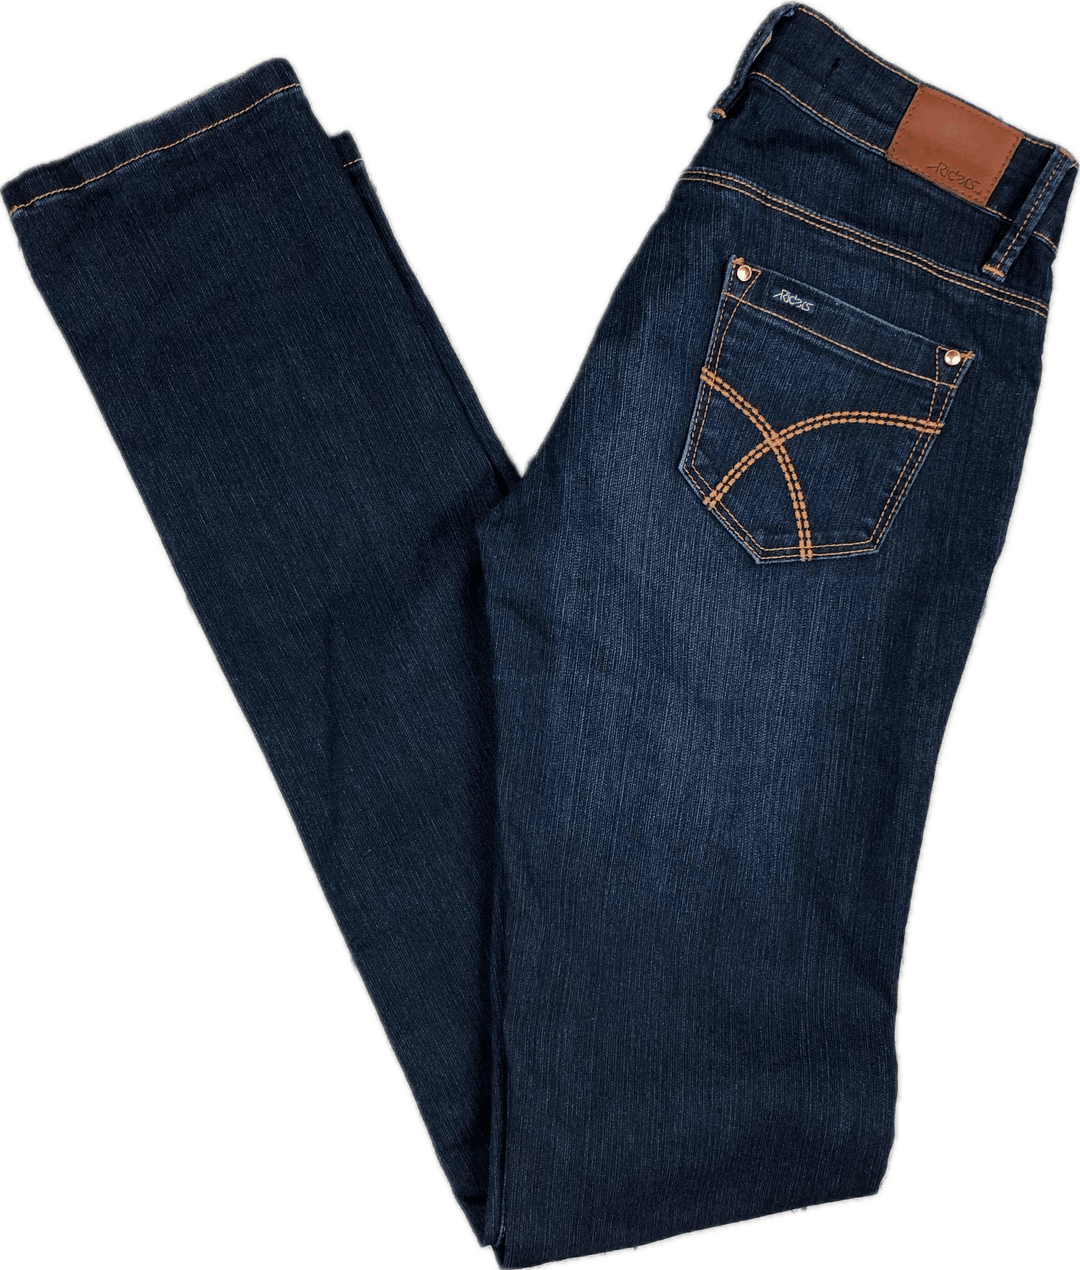 Lee 'Bumster Super Skinny' Stretch Jeans - Size 6 - Jean Pool